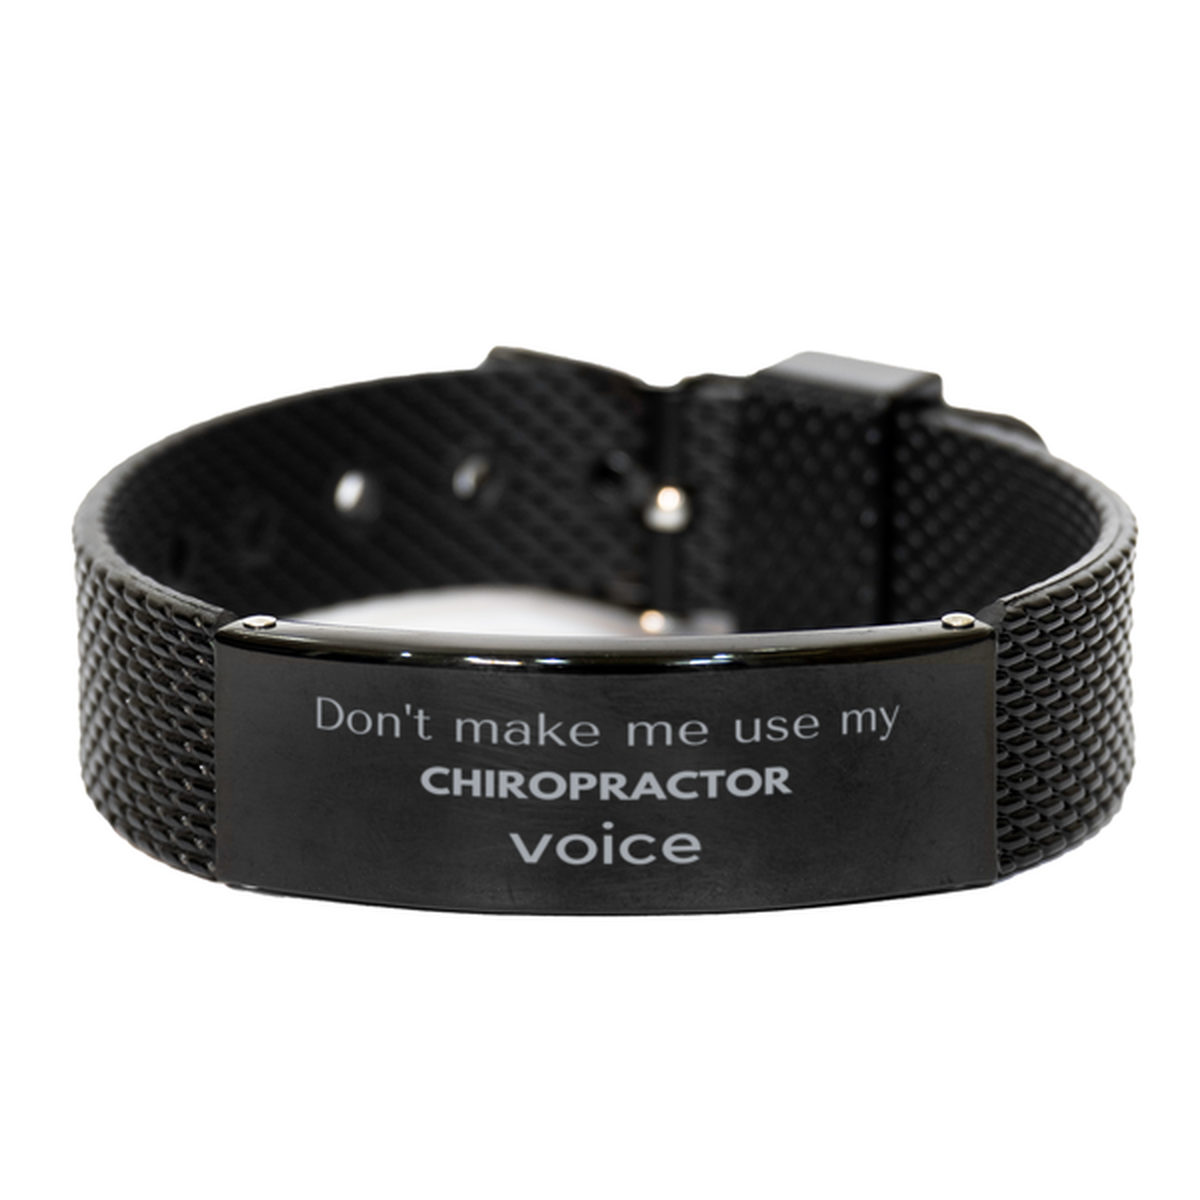 Don't make me use my Chiropractor voice, Sarcasm Chiropractor Gifts, Christmas Chiropractor Black Shark Mesh Bracelet Birthday Unique Gifts For Chiropractor Coworkers, Men, Women, Colleague, Friends